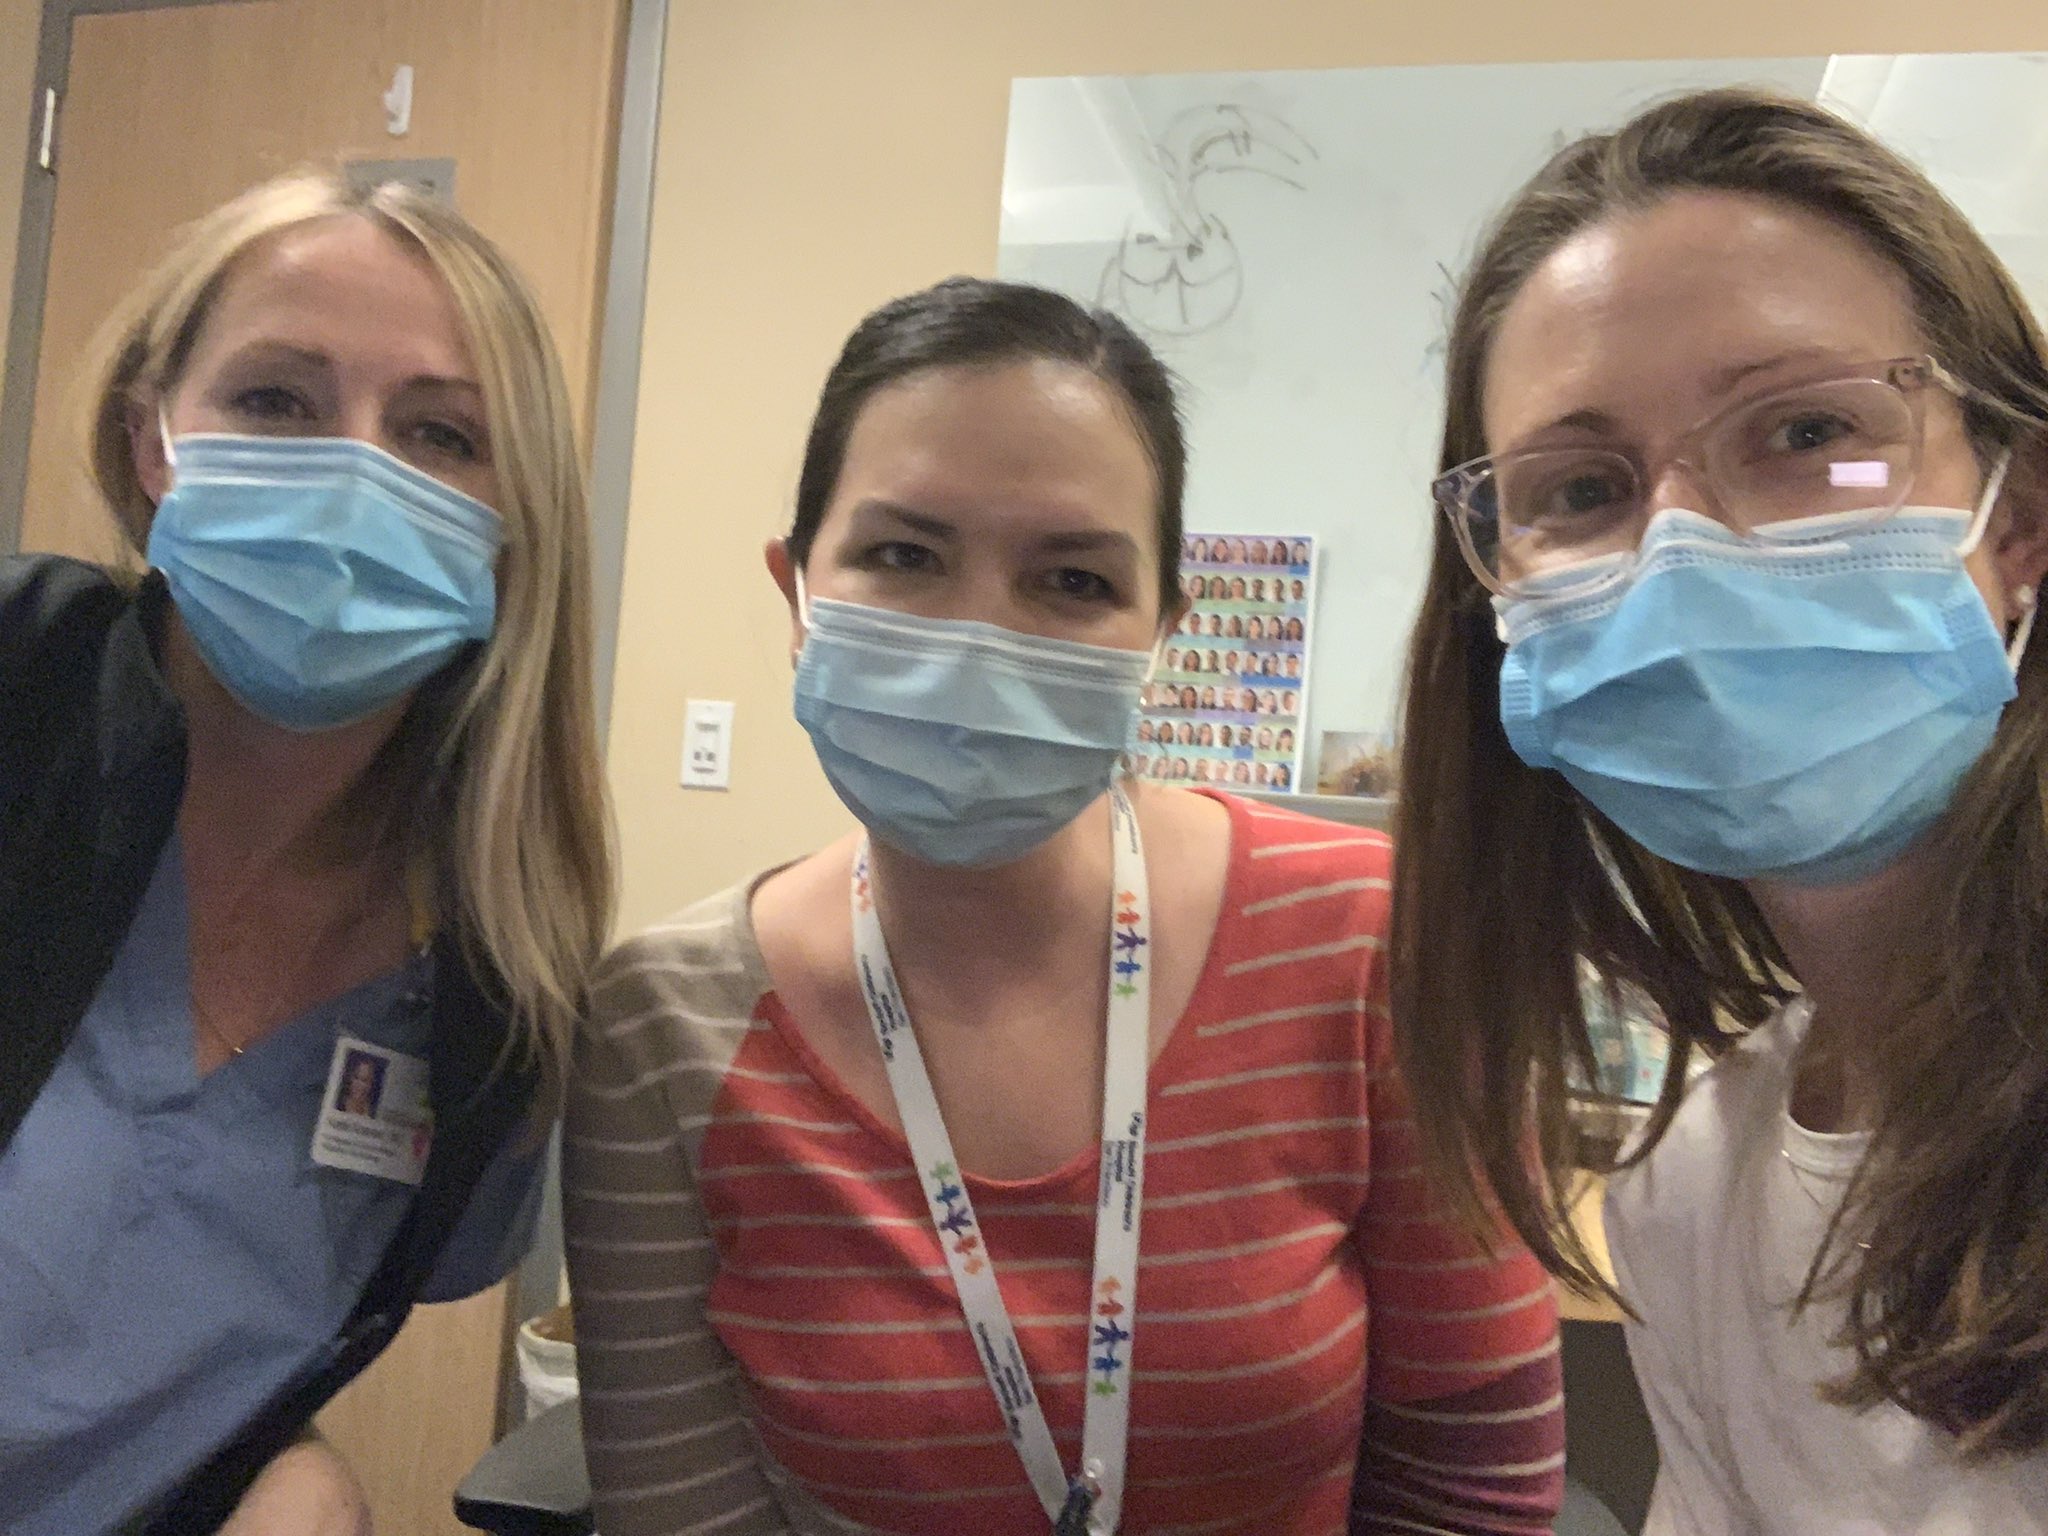 Three UCSF Pediatrics graduates, now attendings (and two Neonatal-Perinatal Medicine graduates too). “If you’re a resident and it’s hard, hang in there. It gets better, and it’s rewarding to do it with friends." 